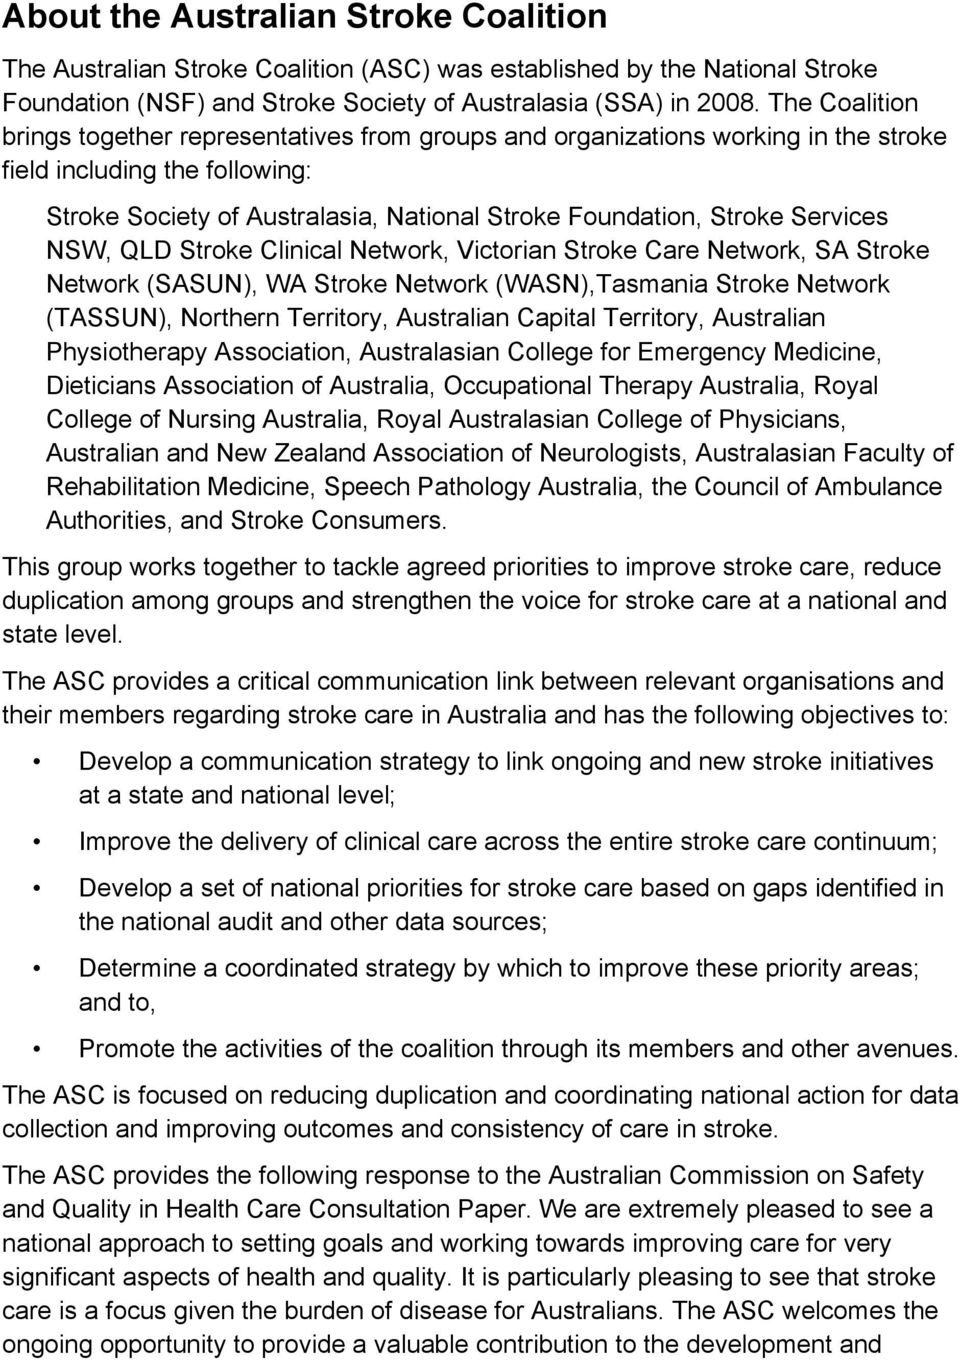 Services NSW, QLD Stroke Clinical Network, Victorian Stroke Care Network, SA Stroke Network (SASUN), WA Stroke Network (WASN),Tasmania Stroke Network (TASSUN), Northern Territory, Australian Capital